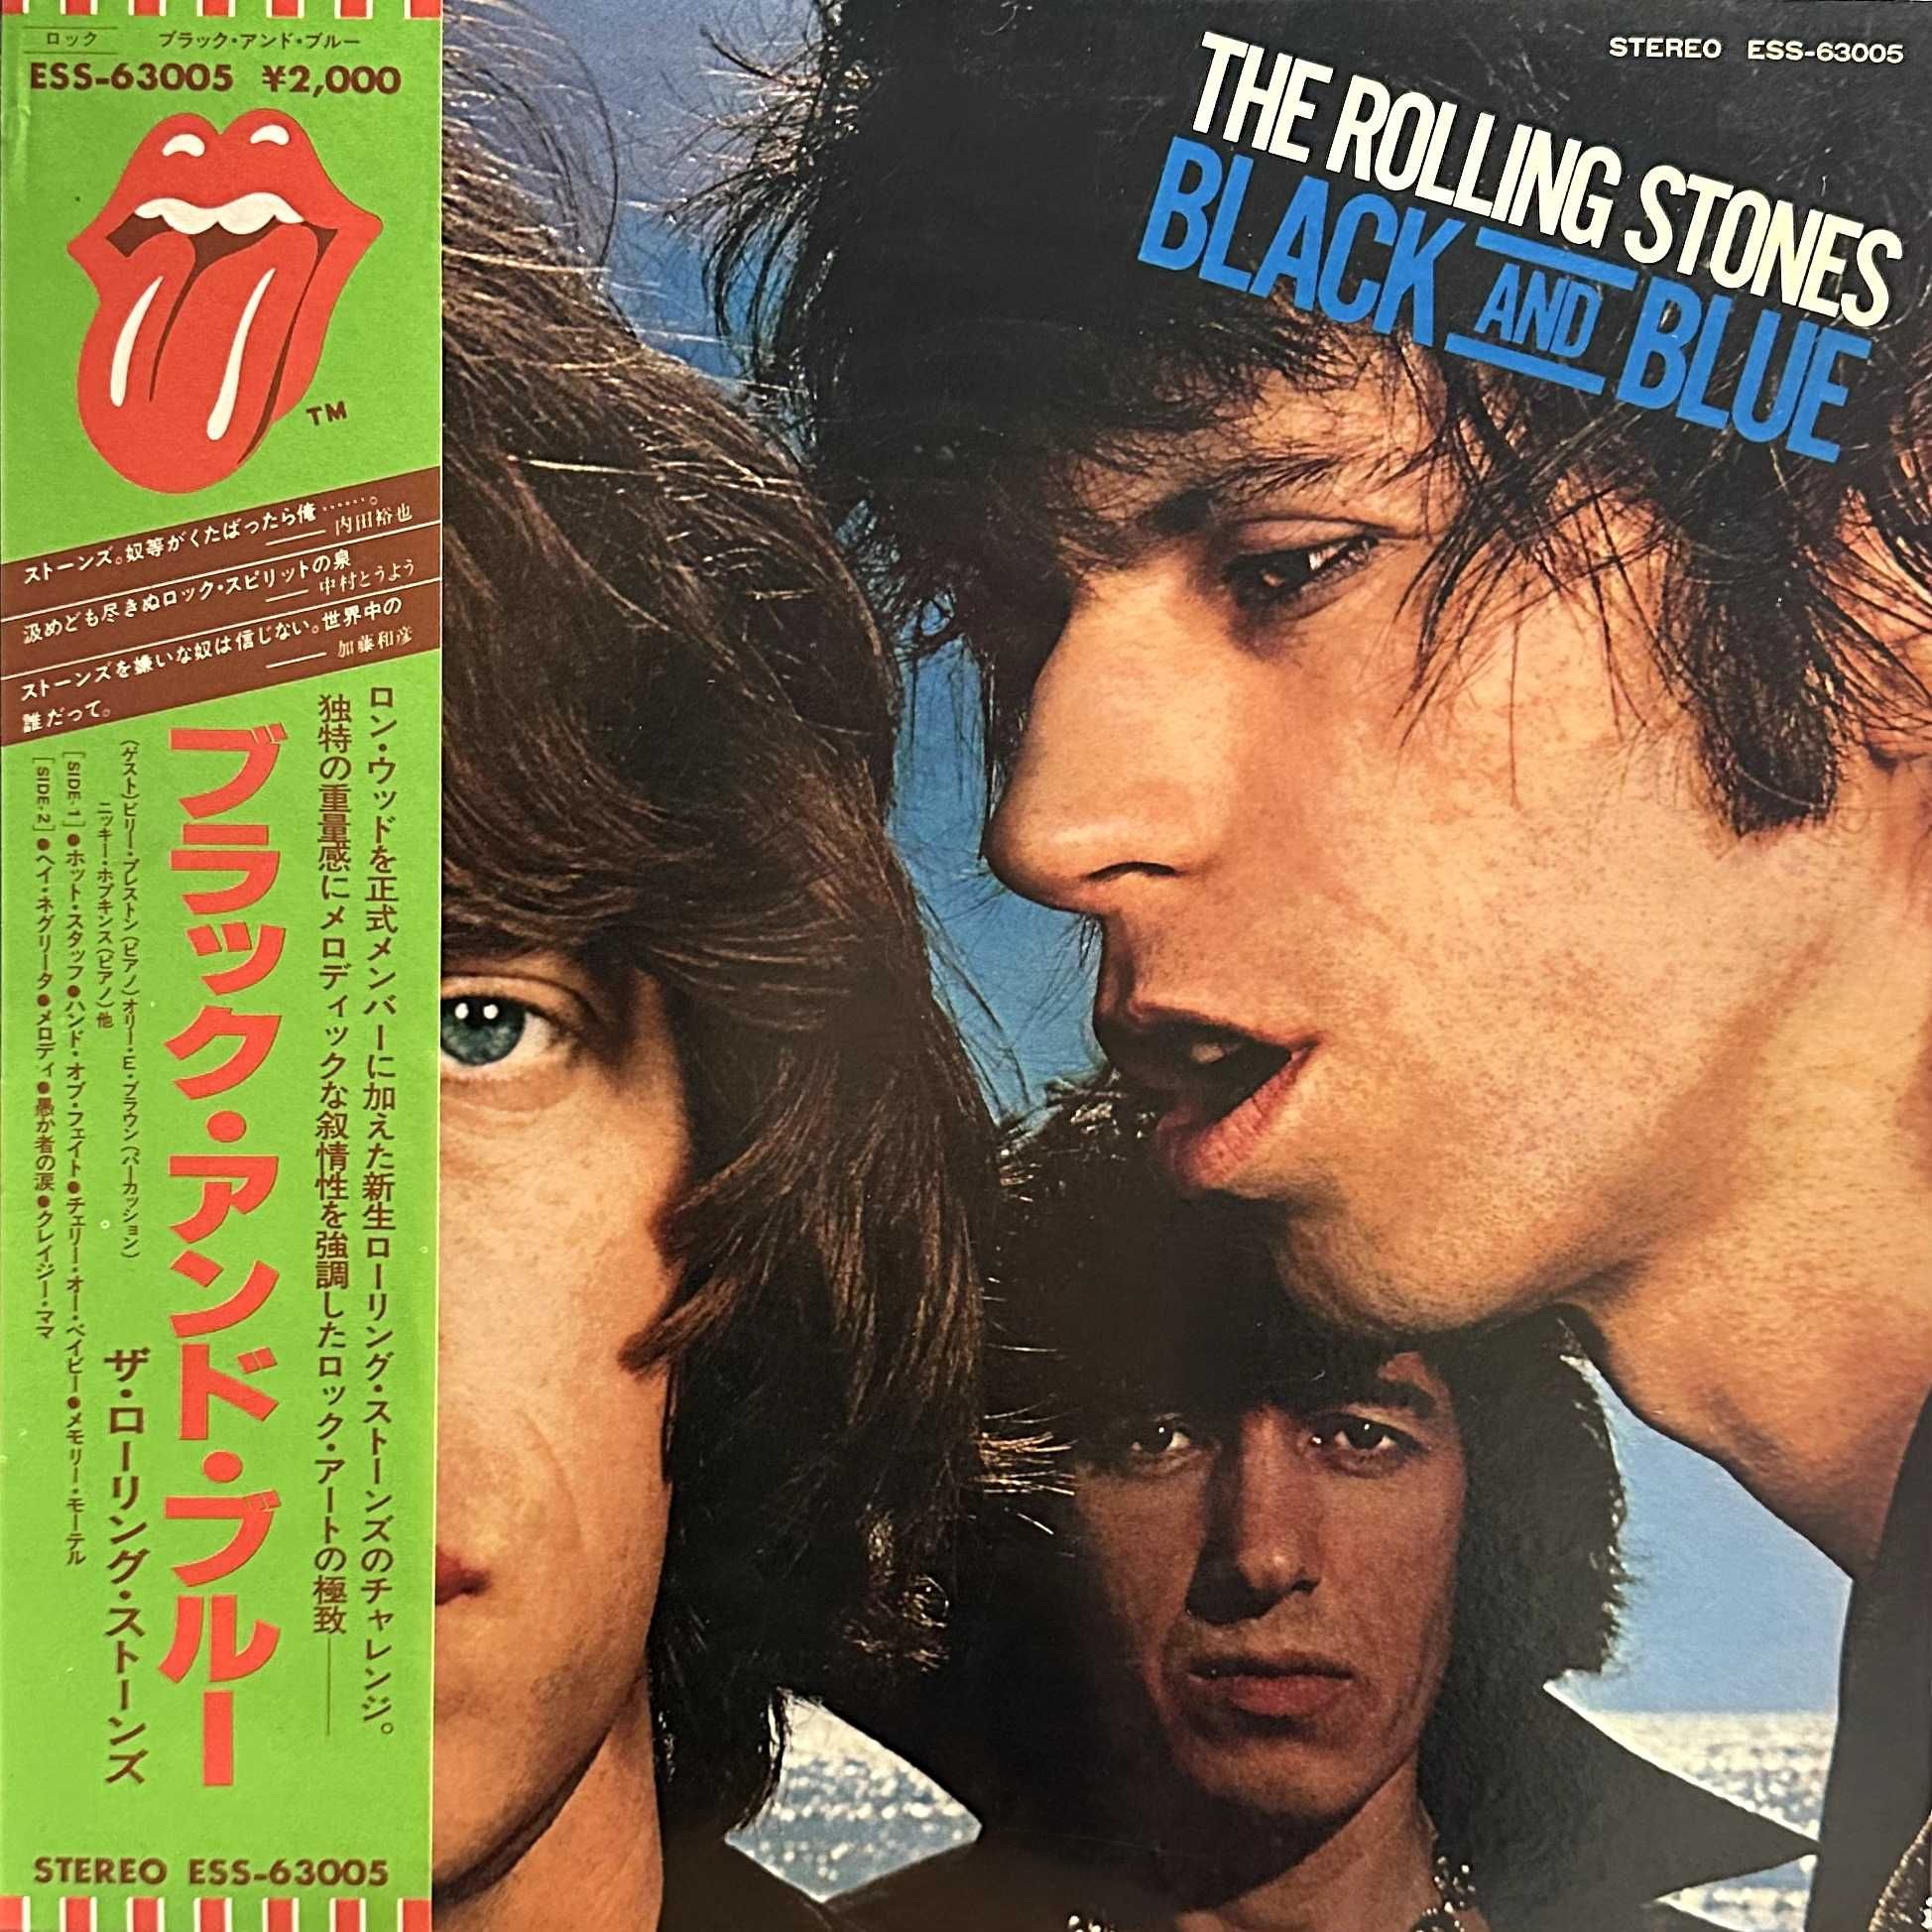 The Rolling Stones - Black and Blue (Vinyl, 1979, Japan)